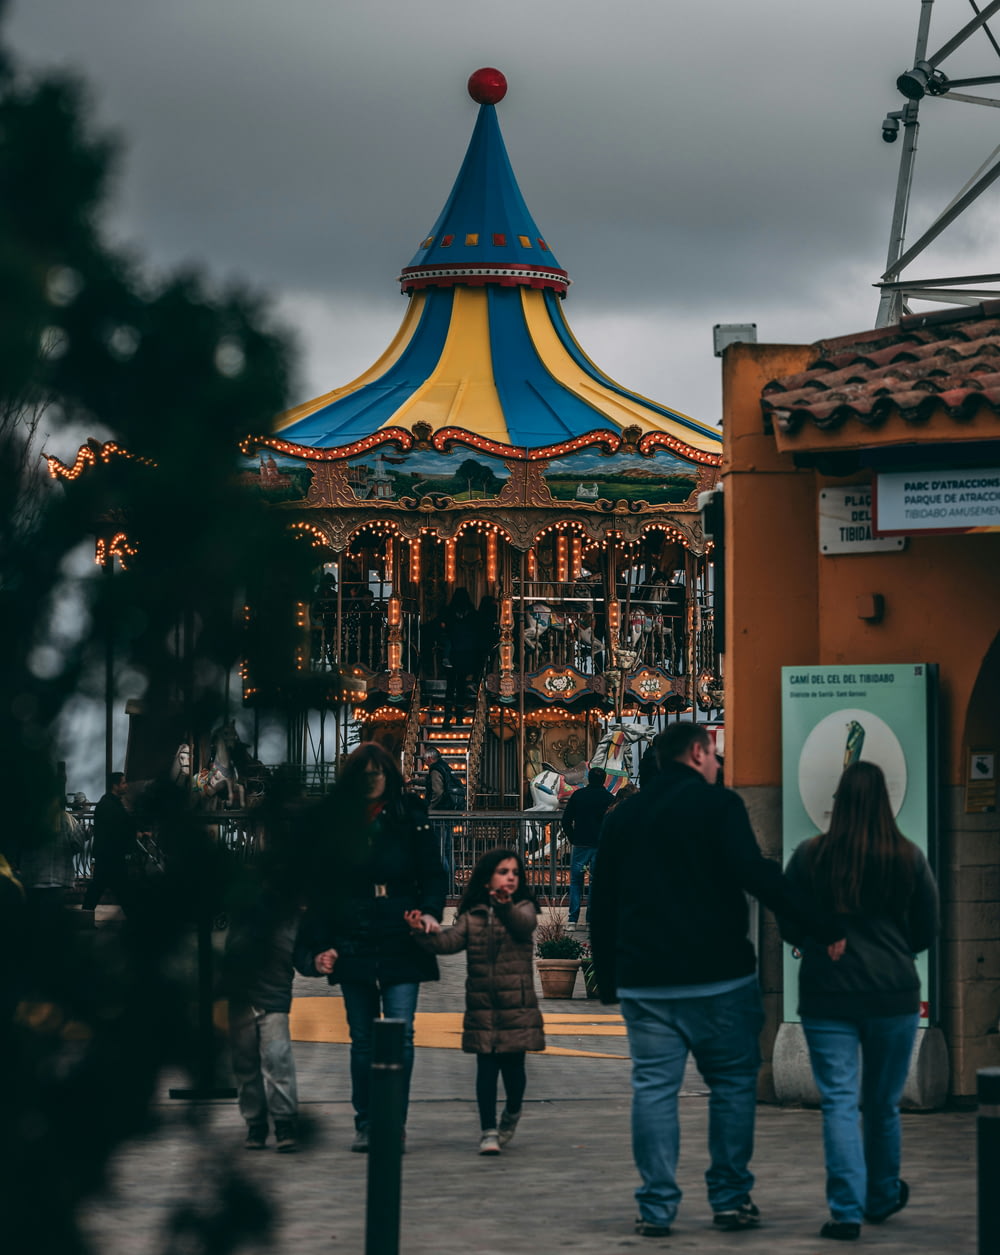 a group of people walking around a merry go round